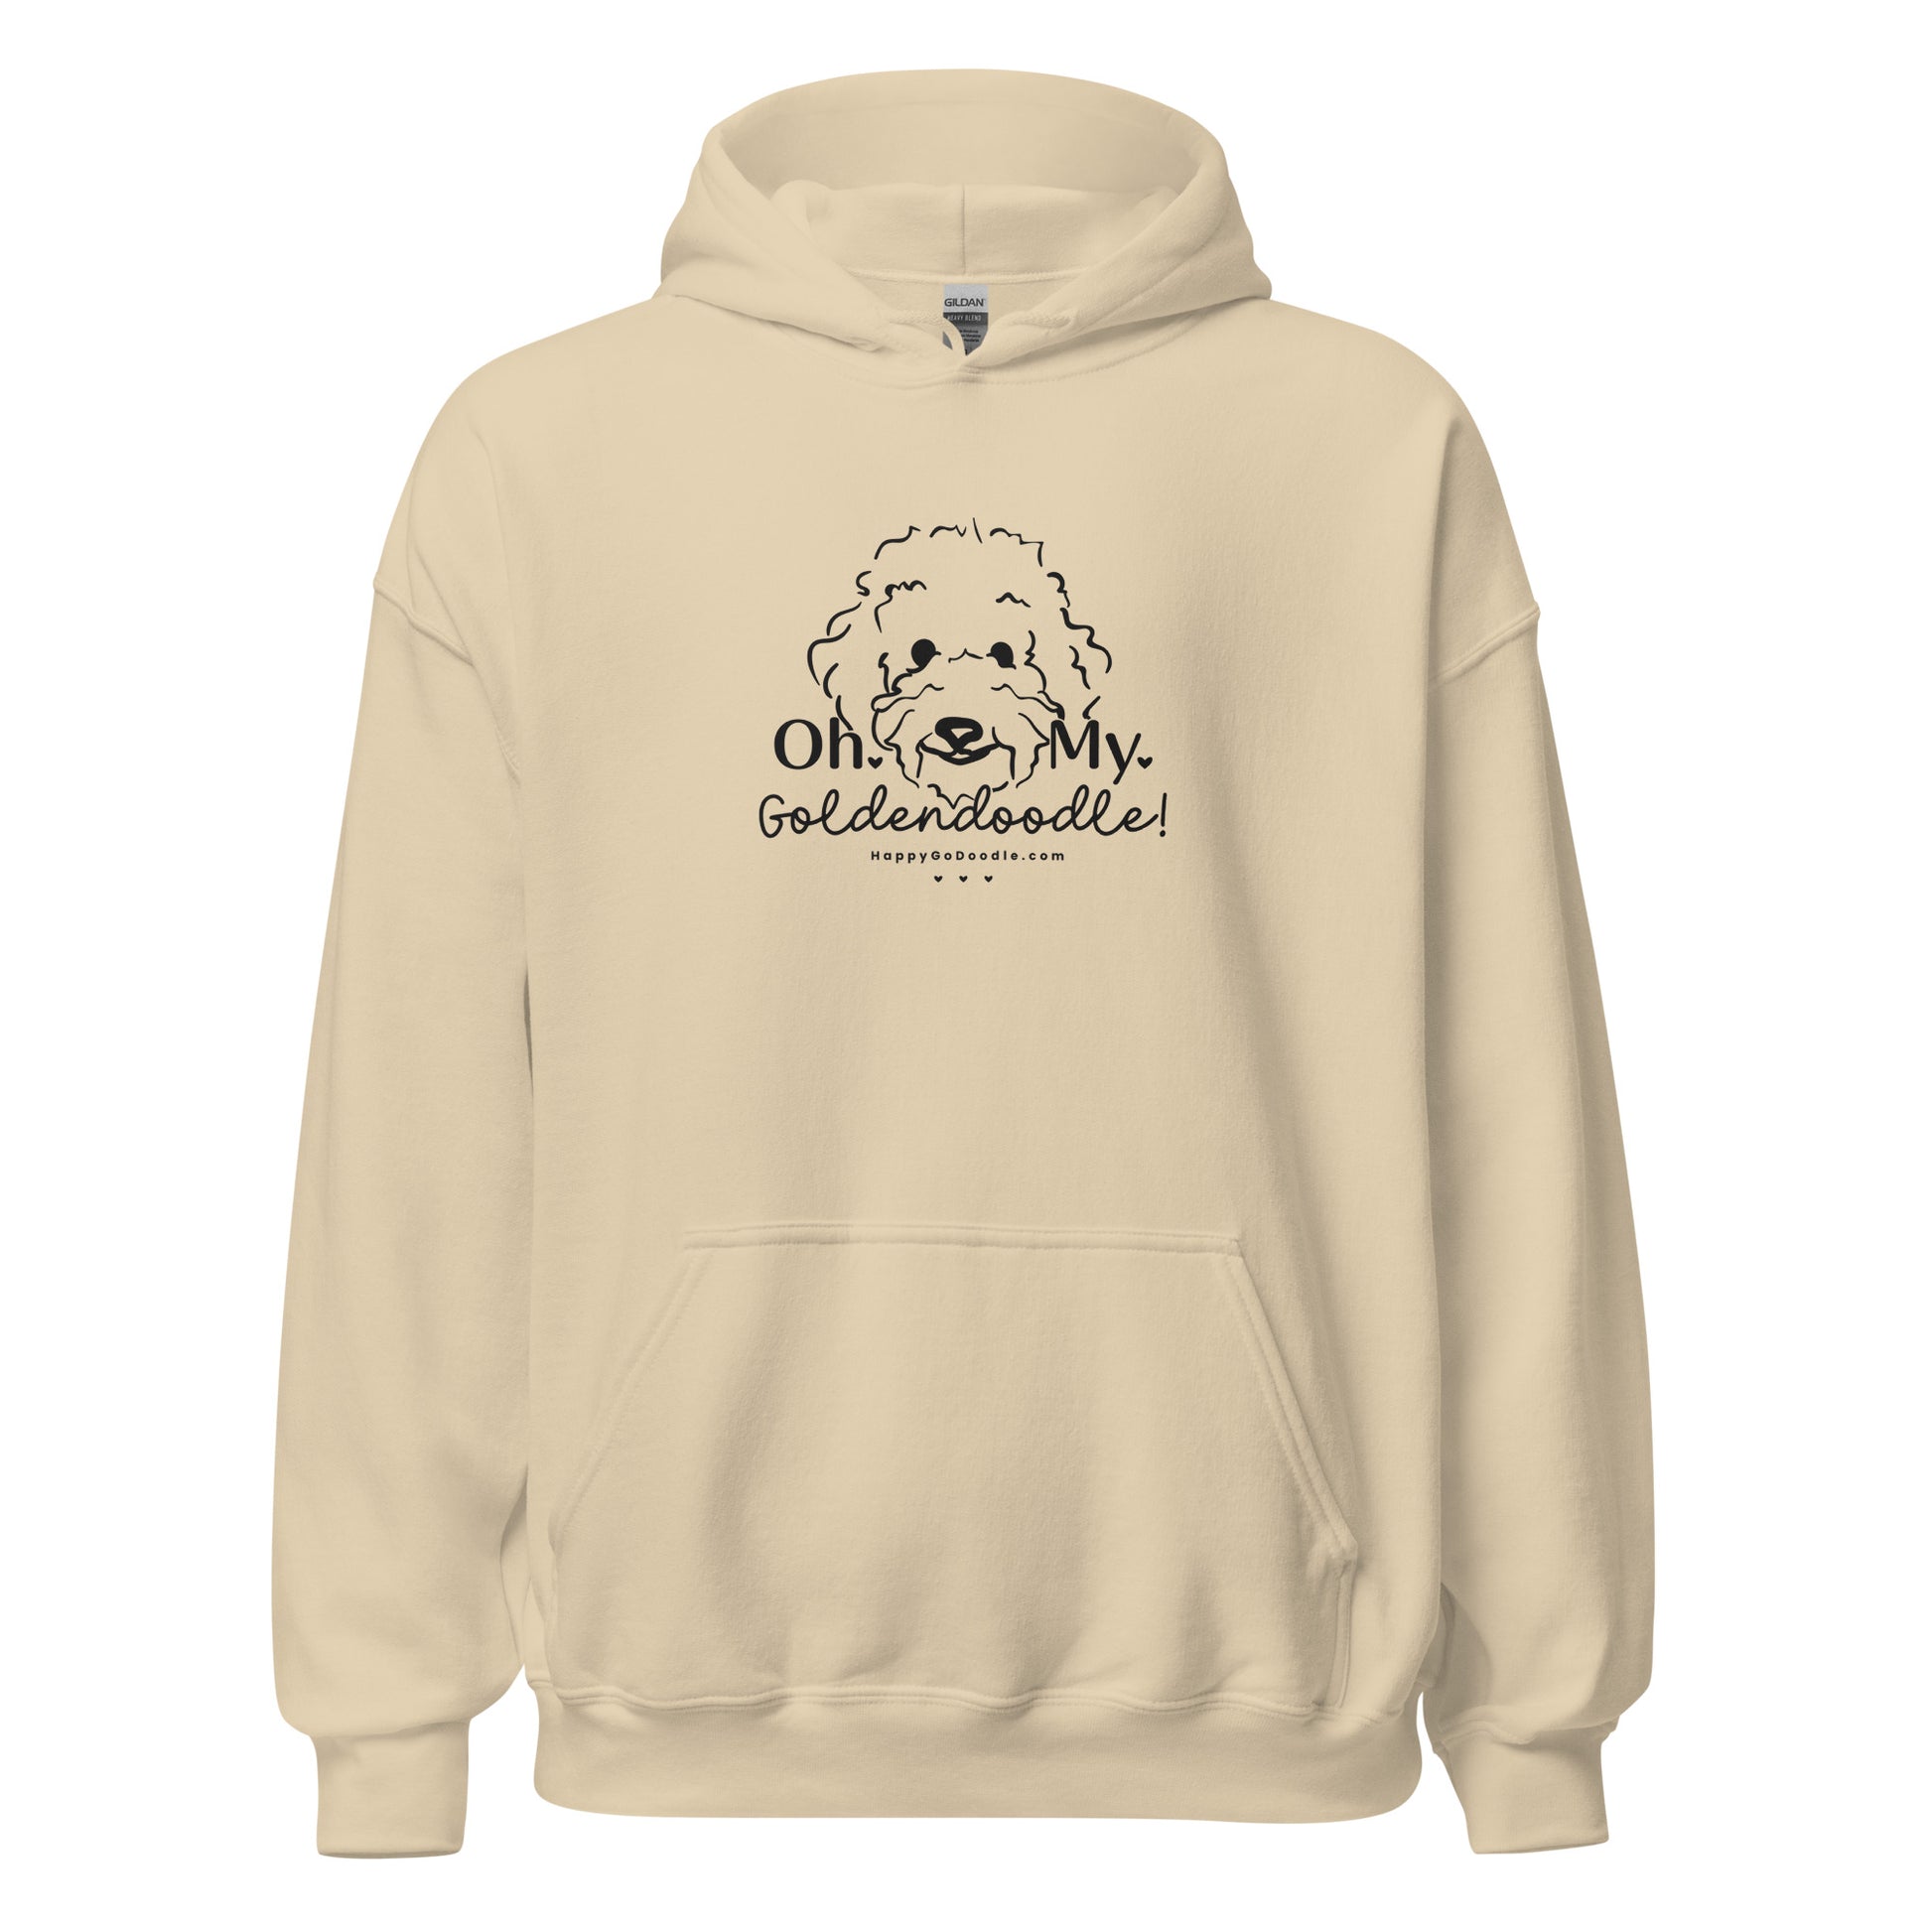 Goldendoodle hoodie with Goldendoodle face and words "Oh My Goldendoodle" in sand  color